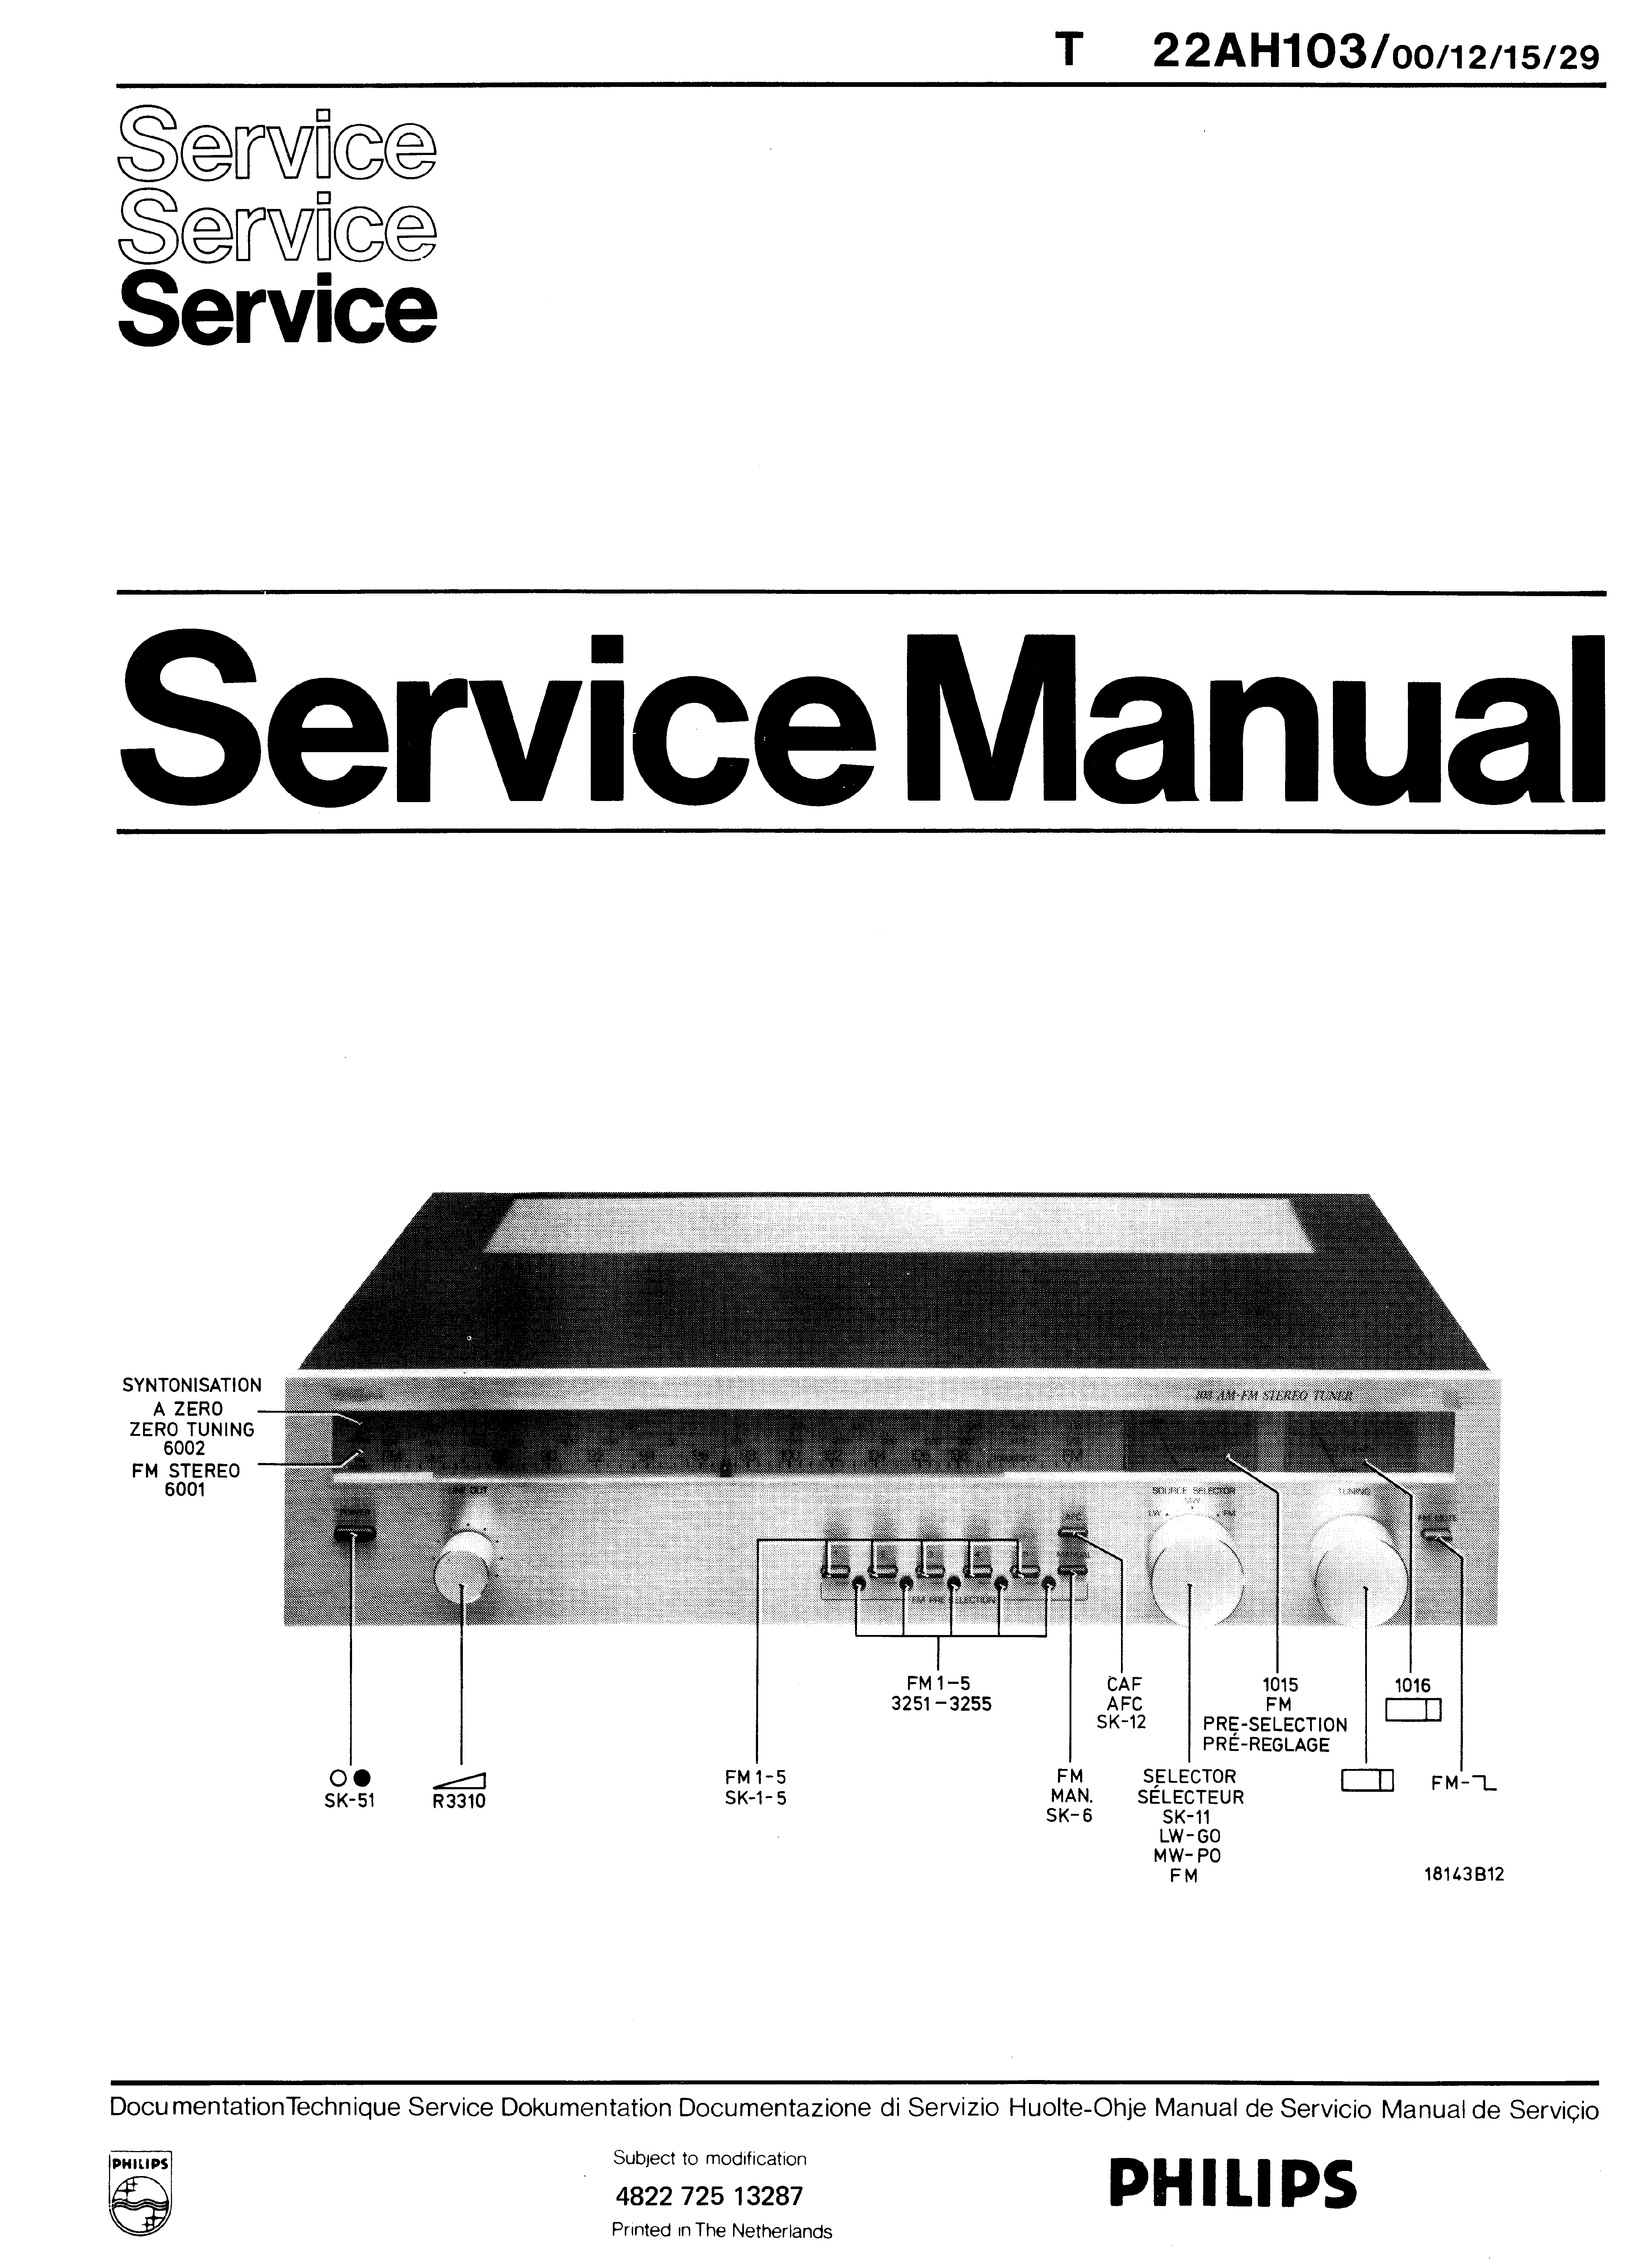 PHILIPS T 22AH103 SM service manual (1st page)